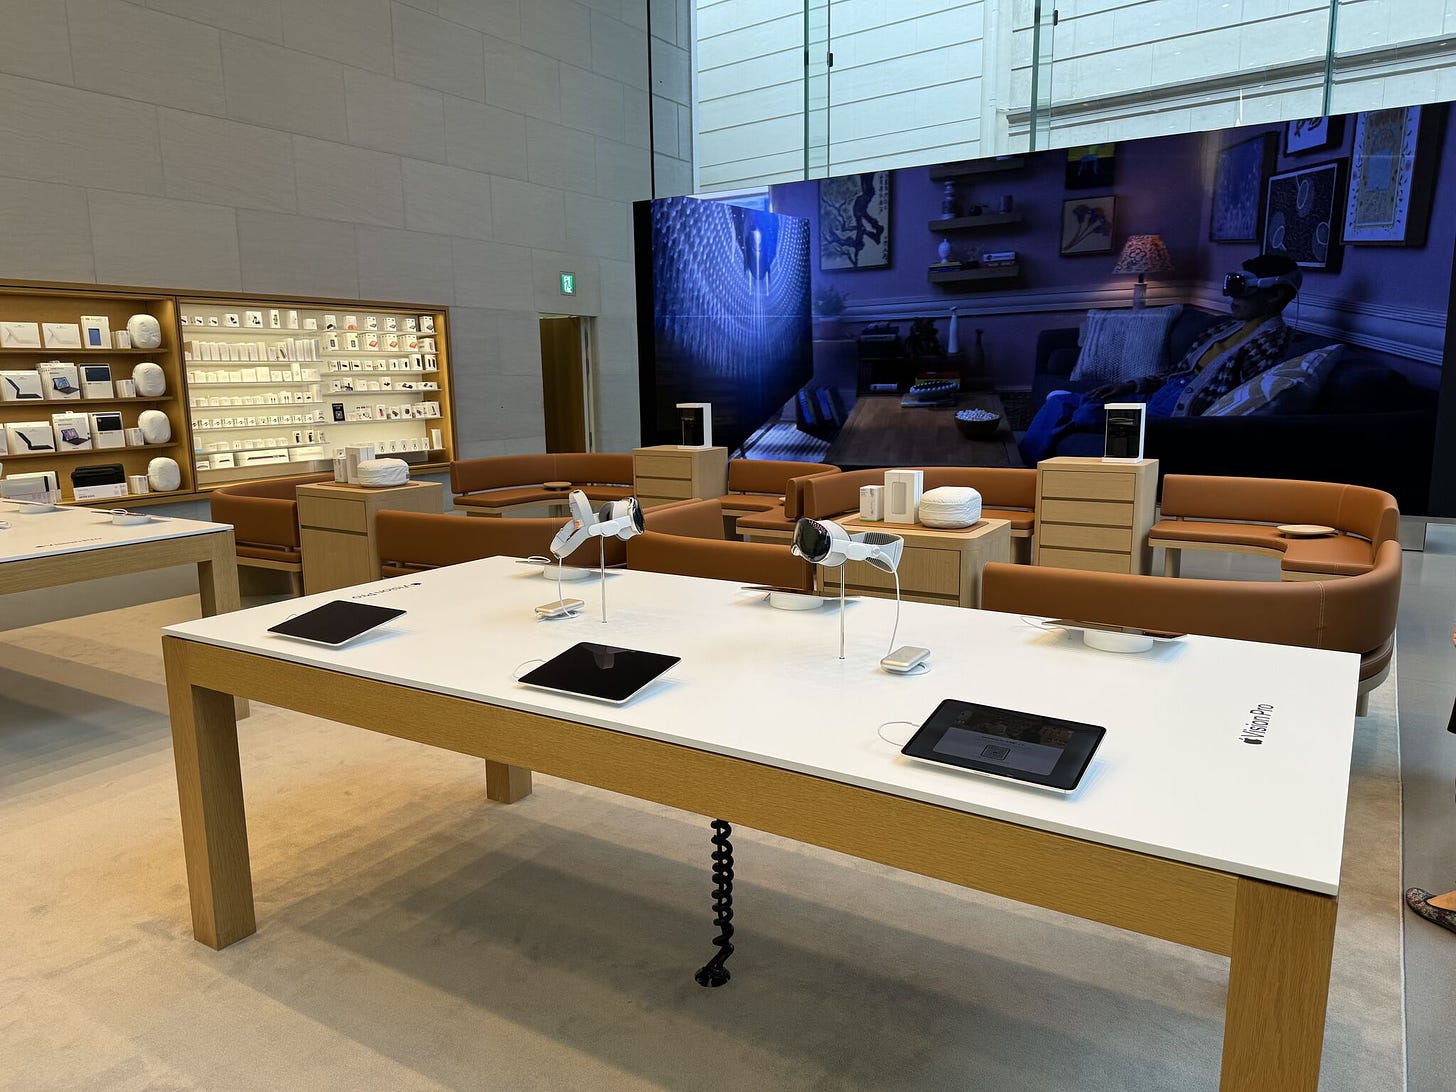 The Demo Zone at Apple Omotesando. Two Spotlight Tables and two sets of sofas are placed in front of the video wall.